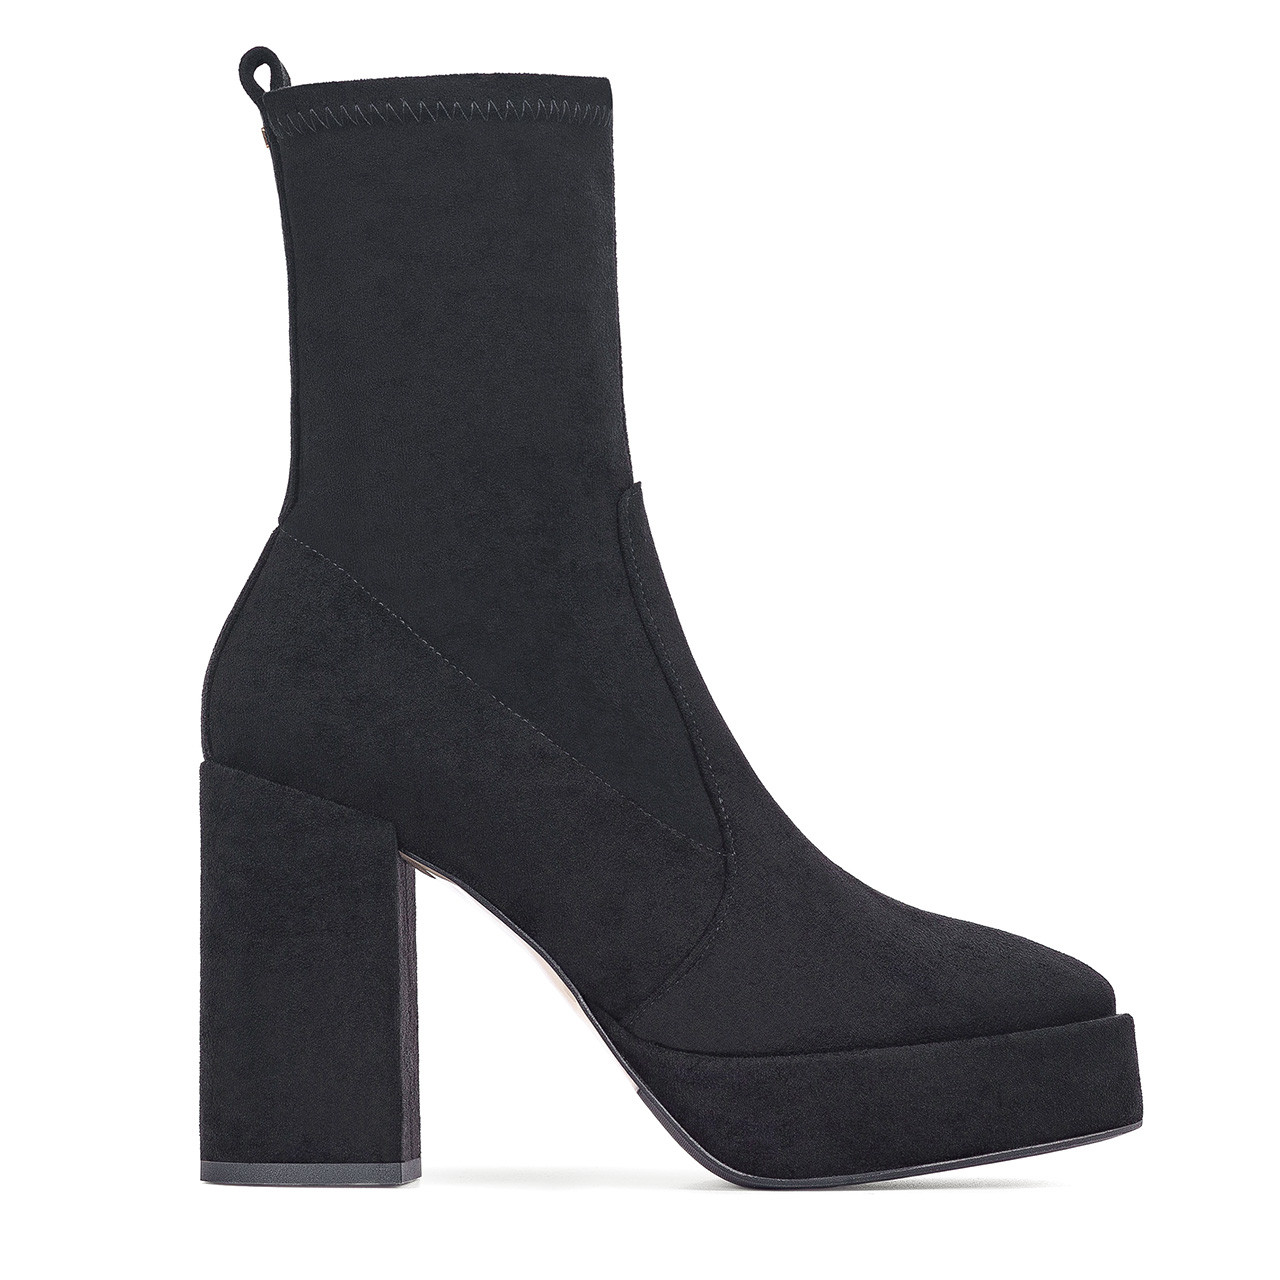 Black premium leather ankle boots with a flexible upper